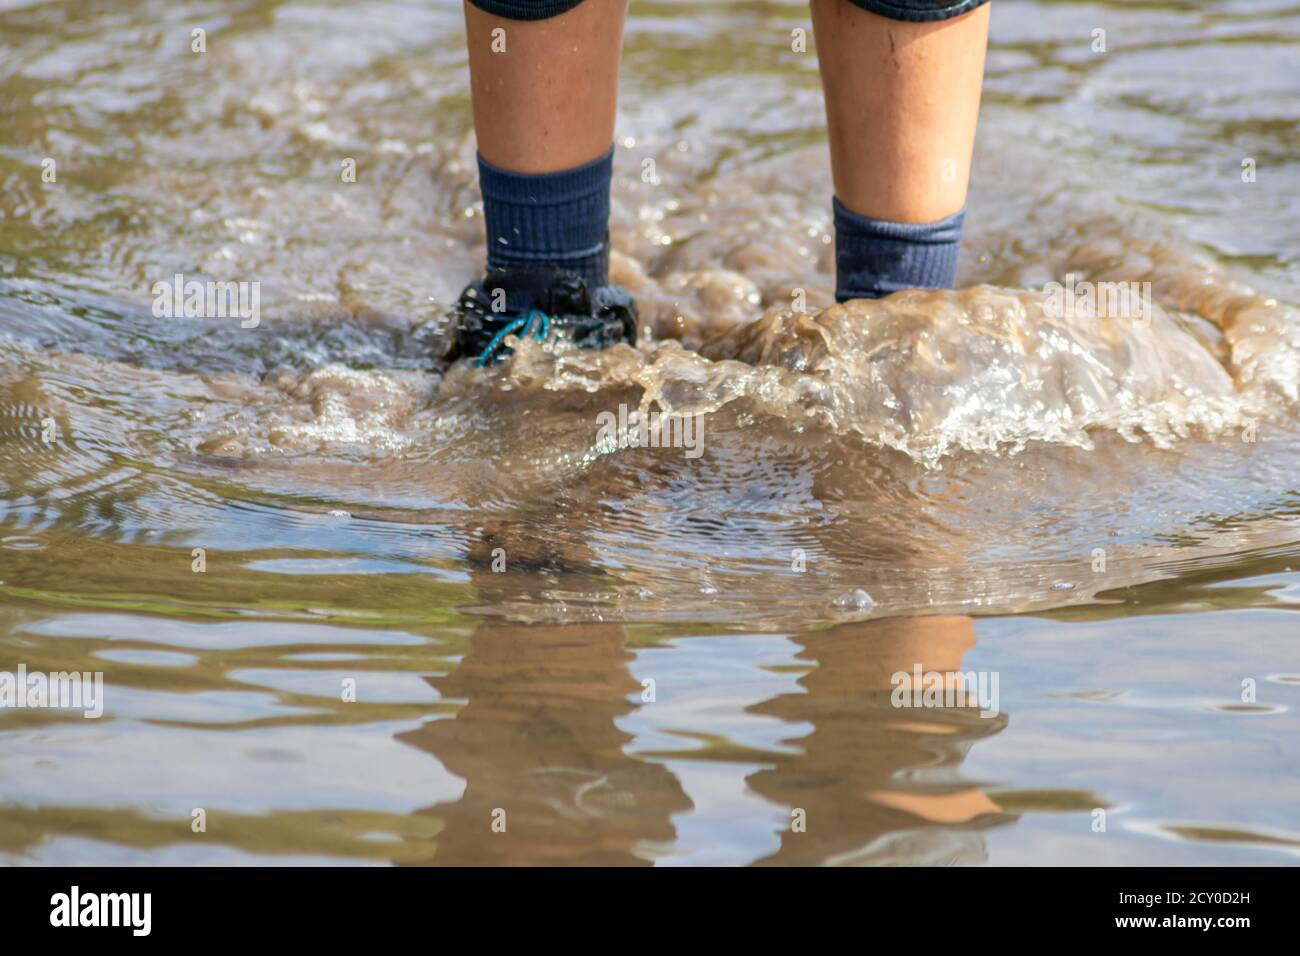 Young boy wading through high tide with blue gumboots after a flood has broken the protecting dike and overflowing the netherlands or coast of ocean Stock Photo